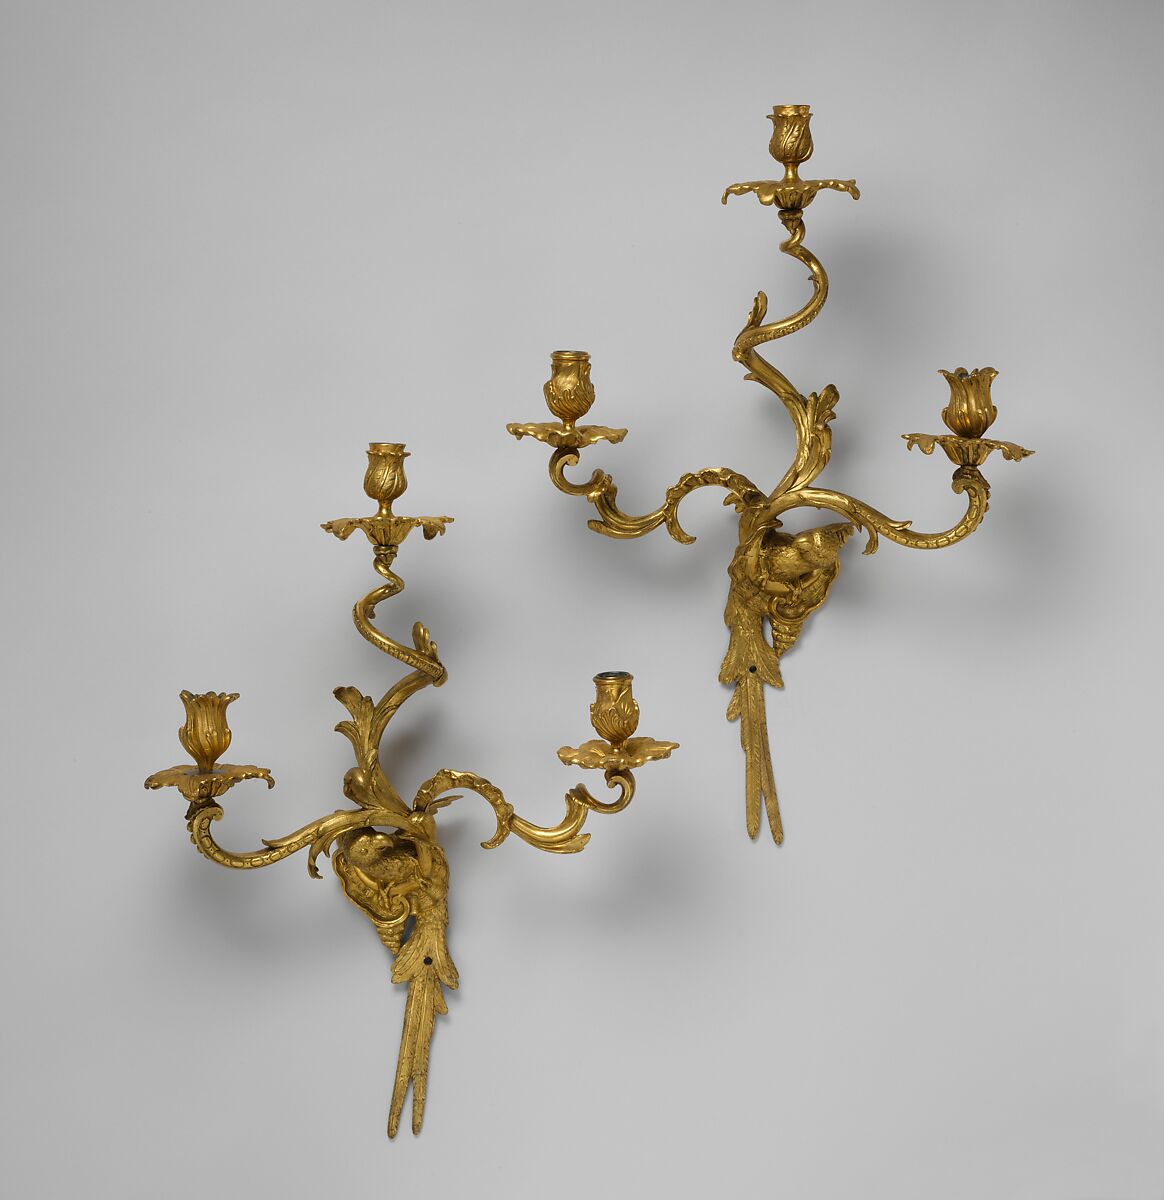 Set of four three-light wall brackets, Design attributed to Charles Cressent (French, Amiens 1685–1768 Paris), Gilt bronze, French 